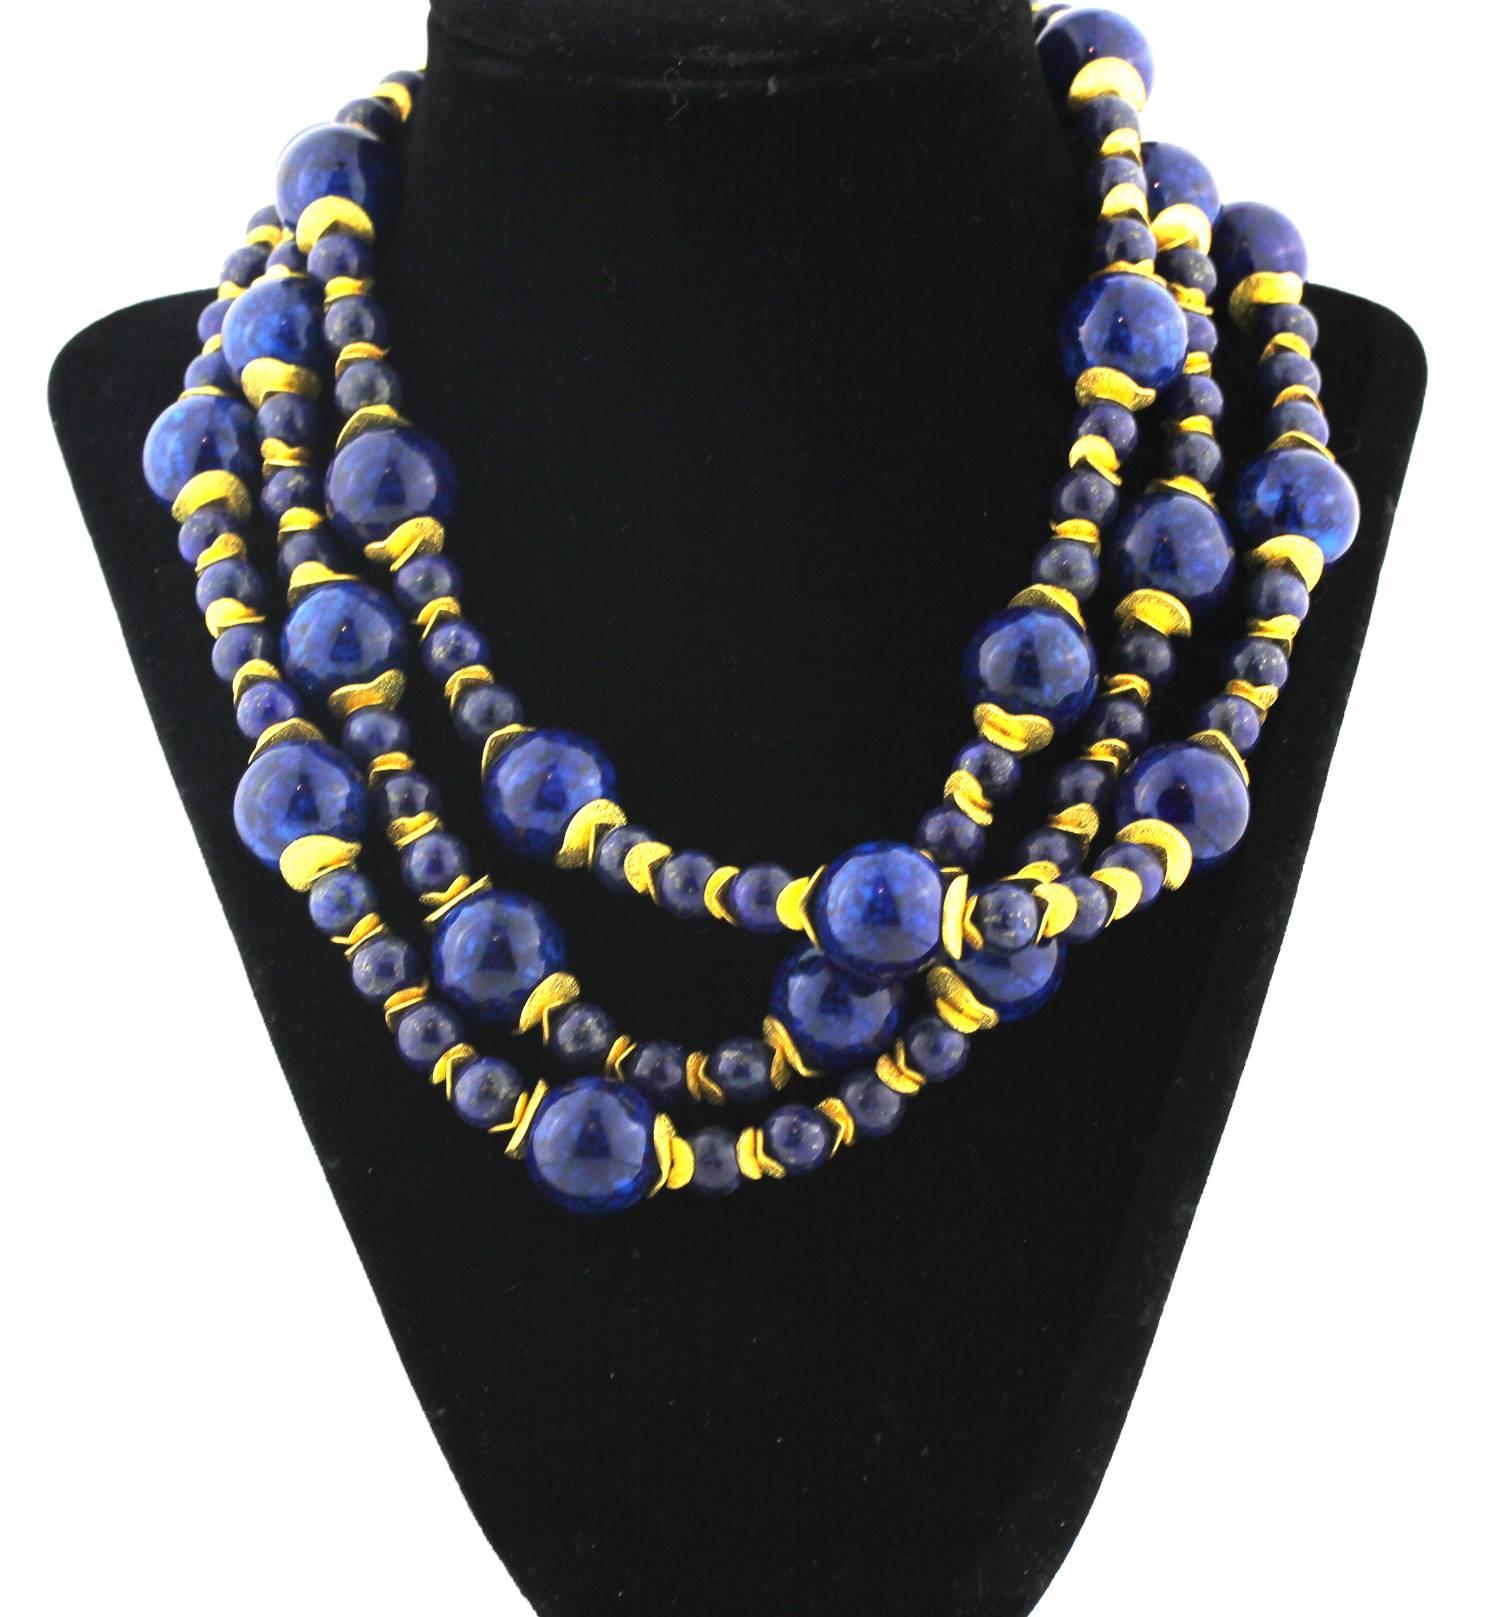 Triple strand of natural Lapis Lazuli from Afghanistan mixed with Blue Coral nicely polished to show off its goldy color flecks with light goldy tone accents necklace
Size:  Large Lapis approximately 16 mm
Length:  17 inches
Clasp:  gold tone